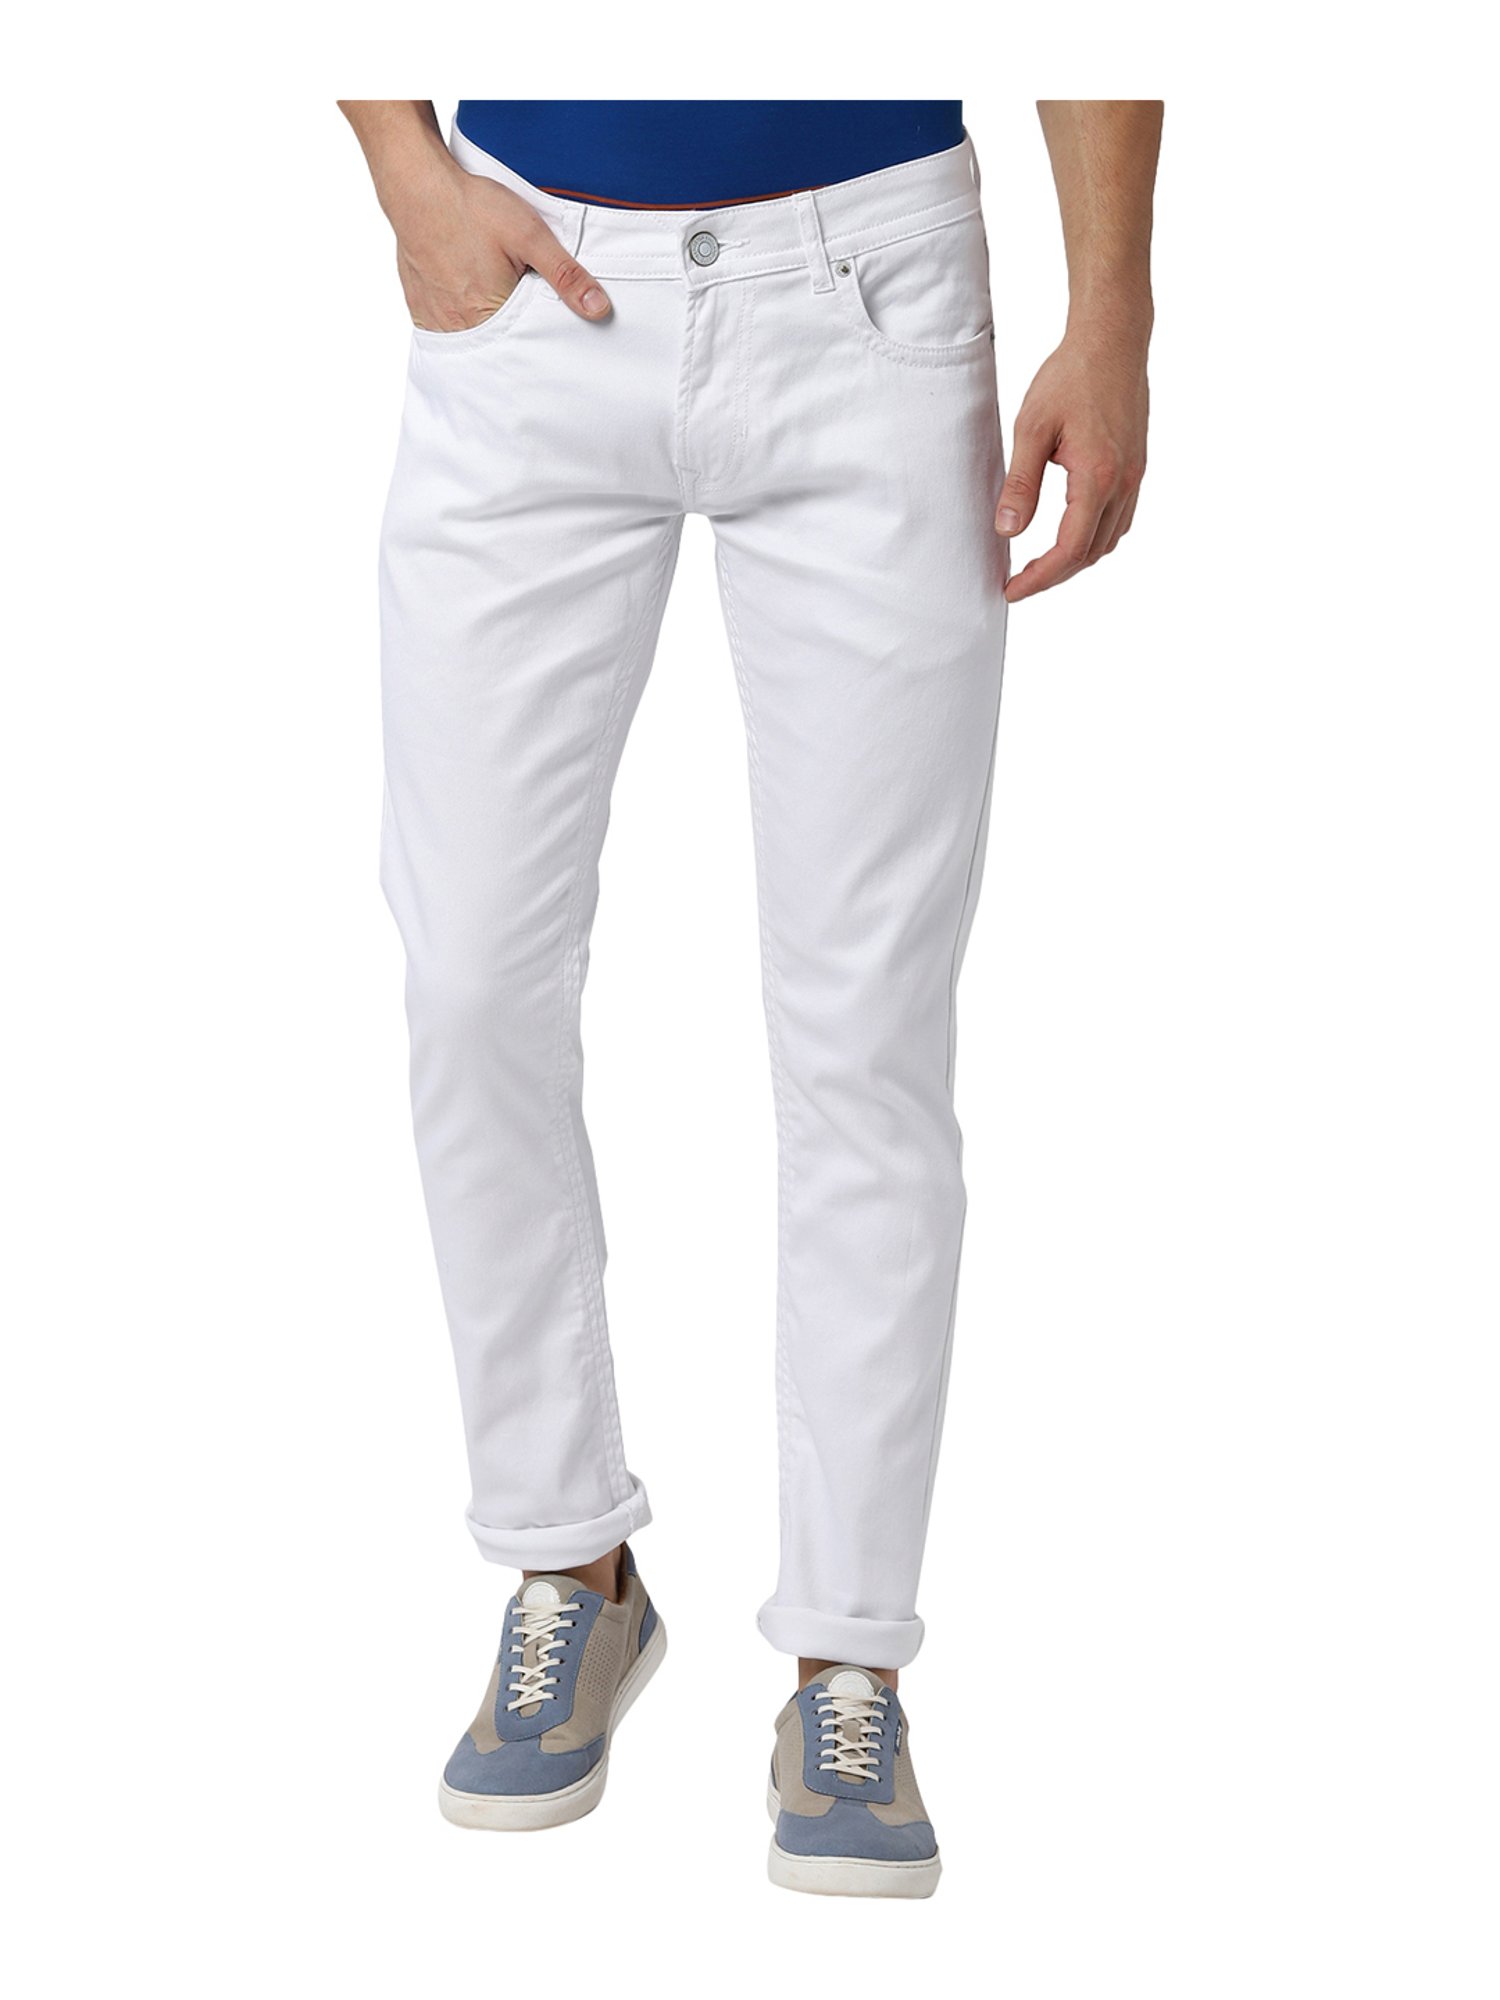 rugged white jeans